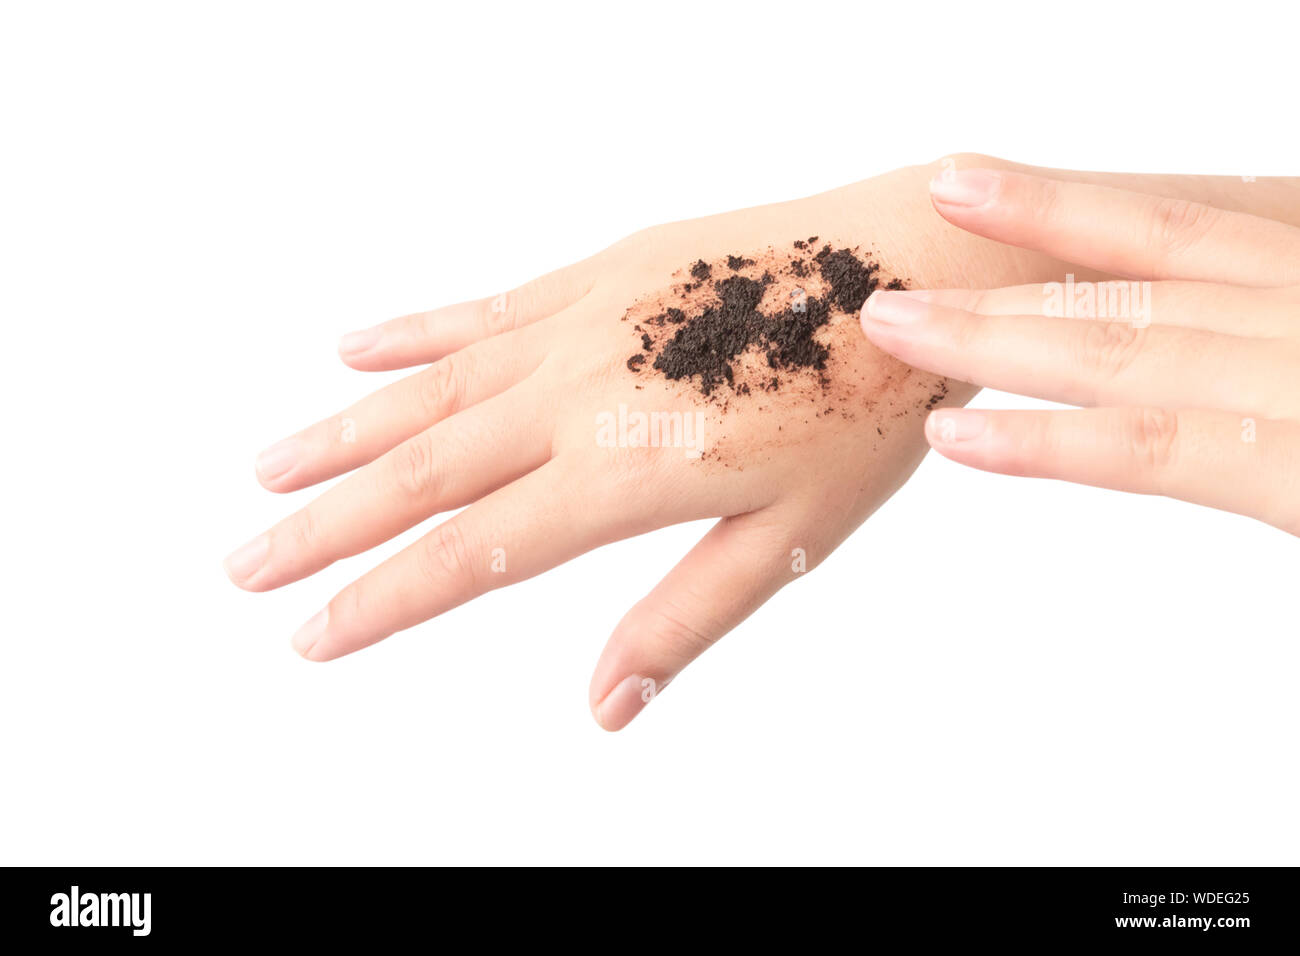 Cropped Image Of Woman Applying Coffee Scrub On Hand Against White Background Stock Photo